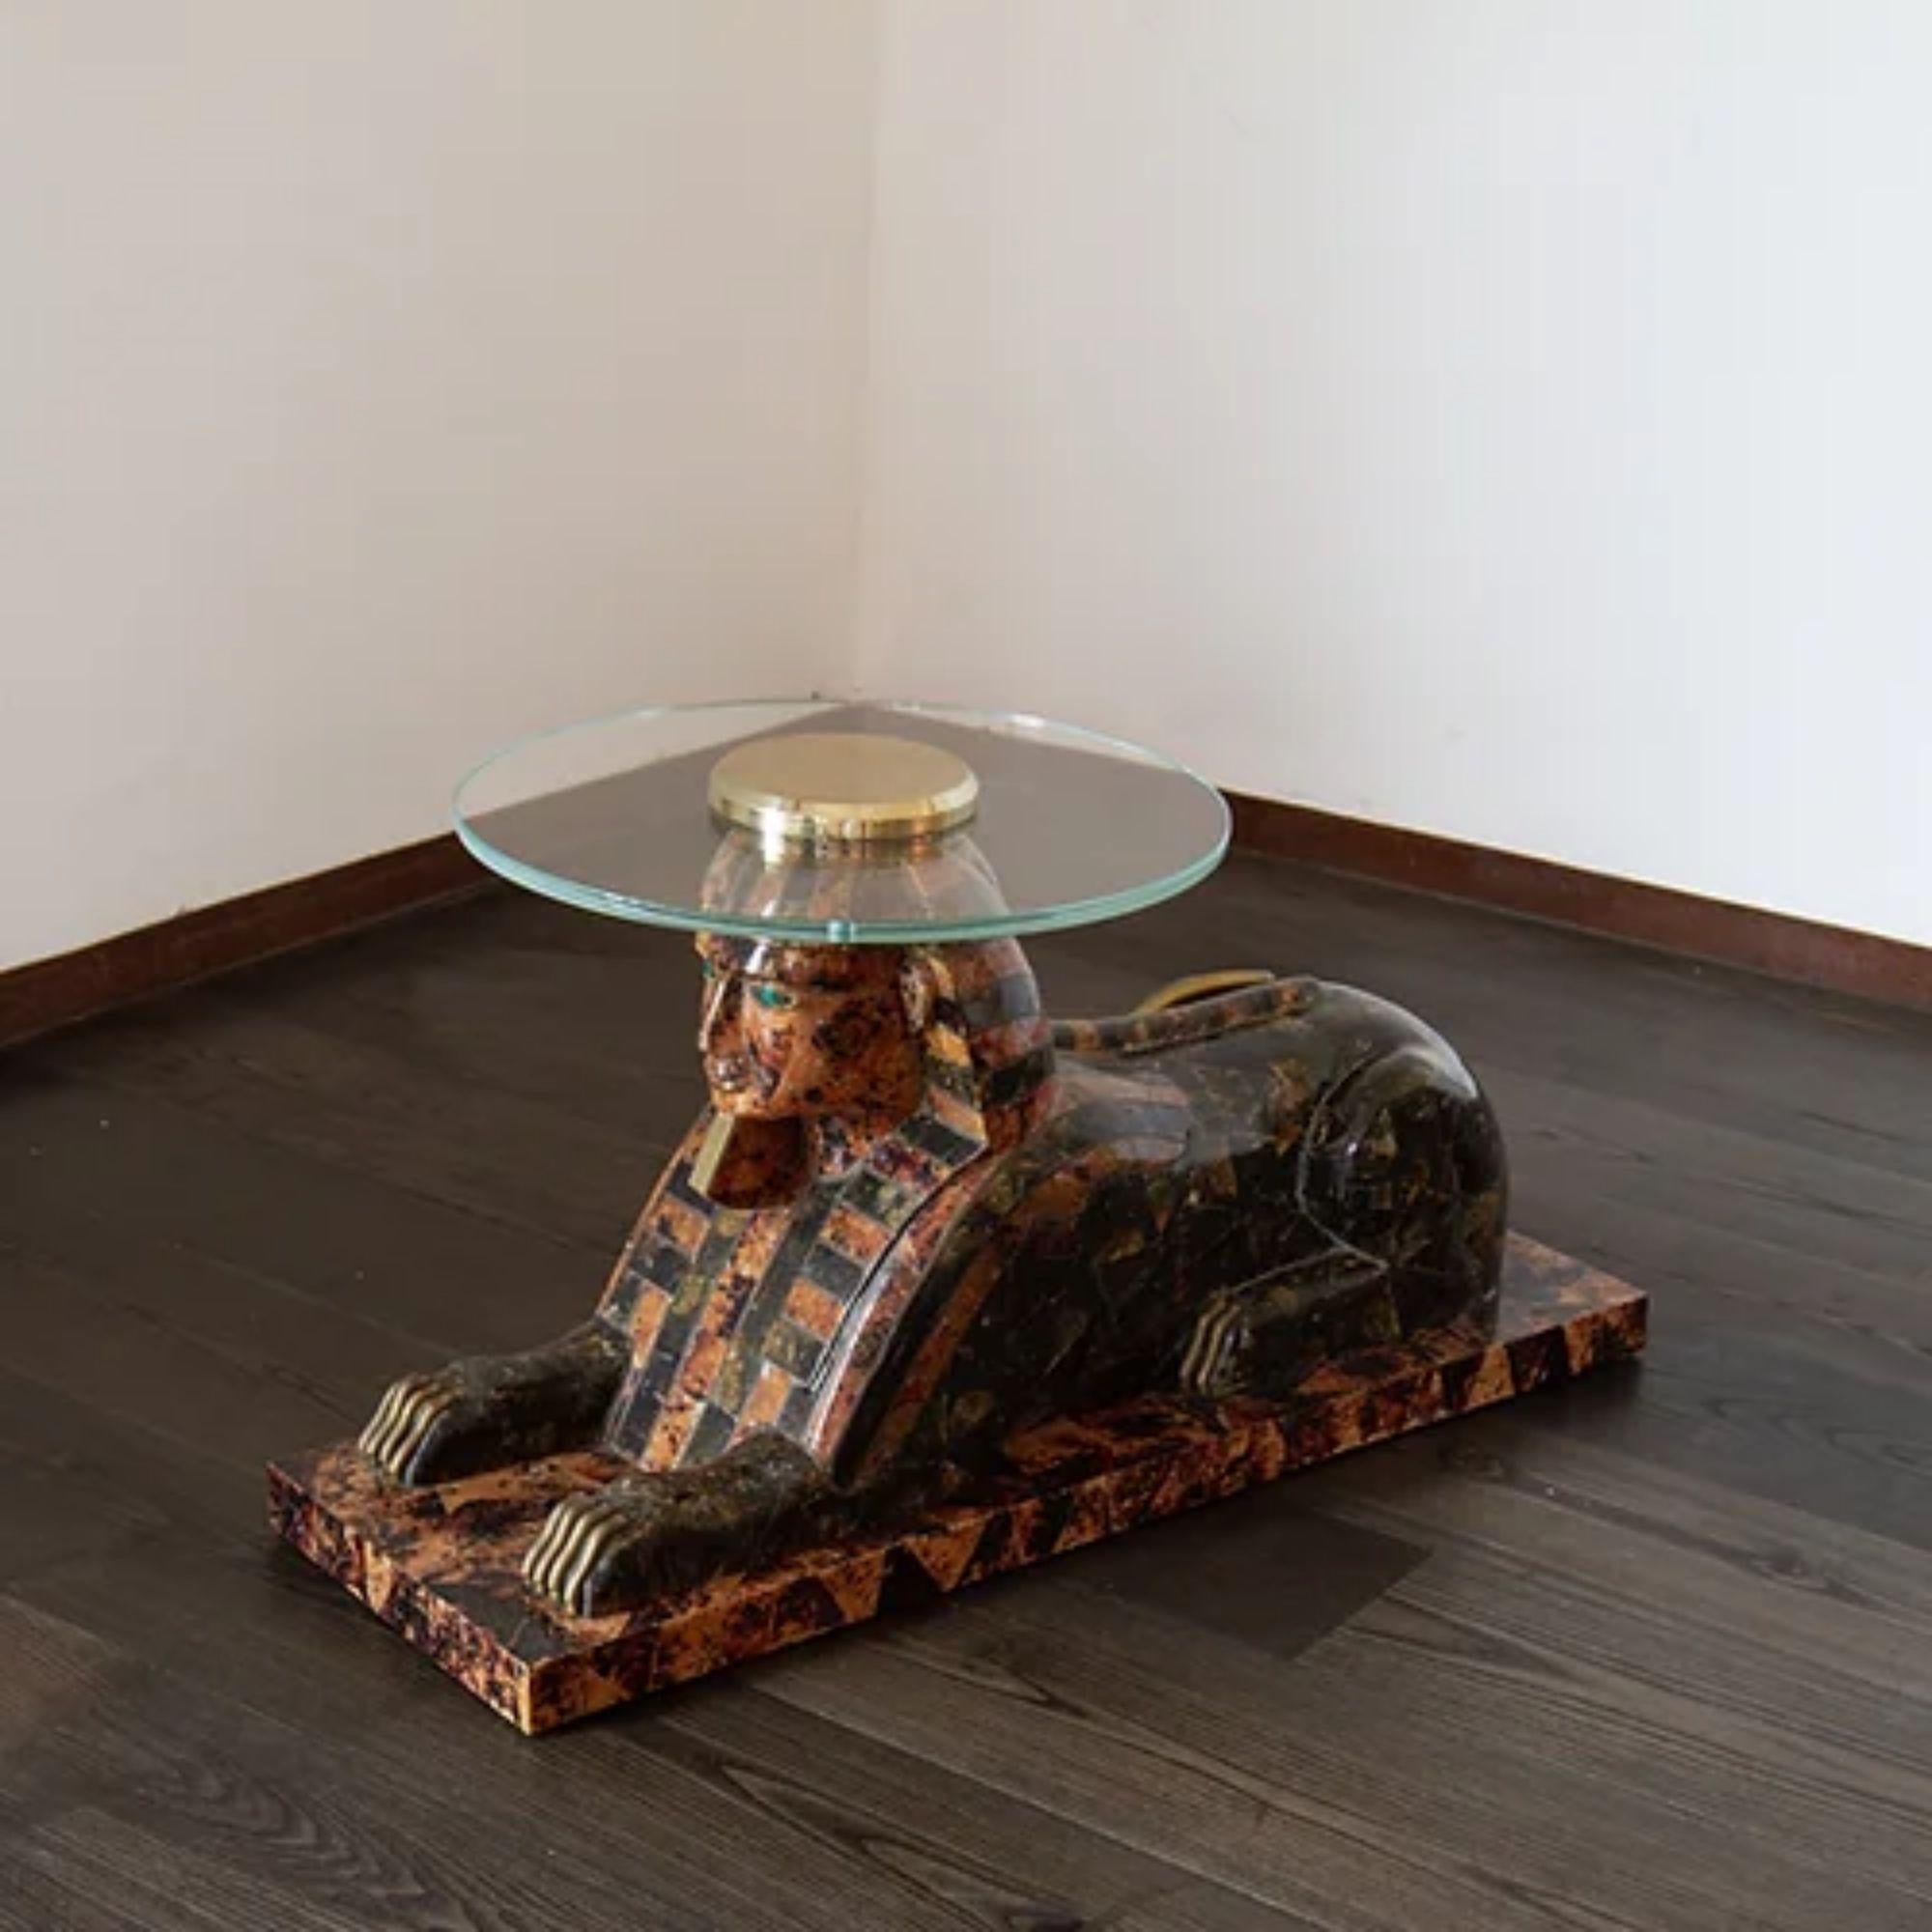 A Maitland Smith designed exotic Sphinx side table in tessellated marble and coconut shell decorated with brass banding, featuring inset malachite eyes and a tarnished brass tail, feet and beard. The table is complete with a custom circular glass